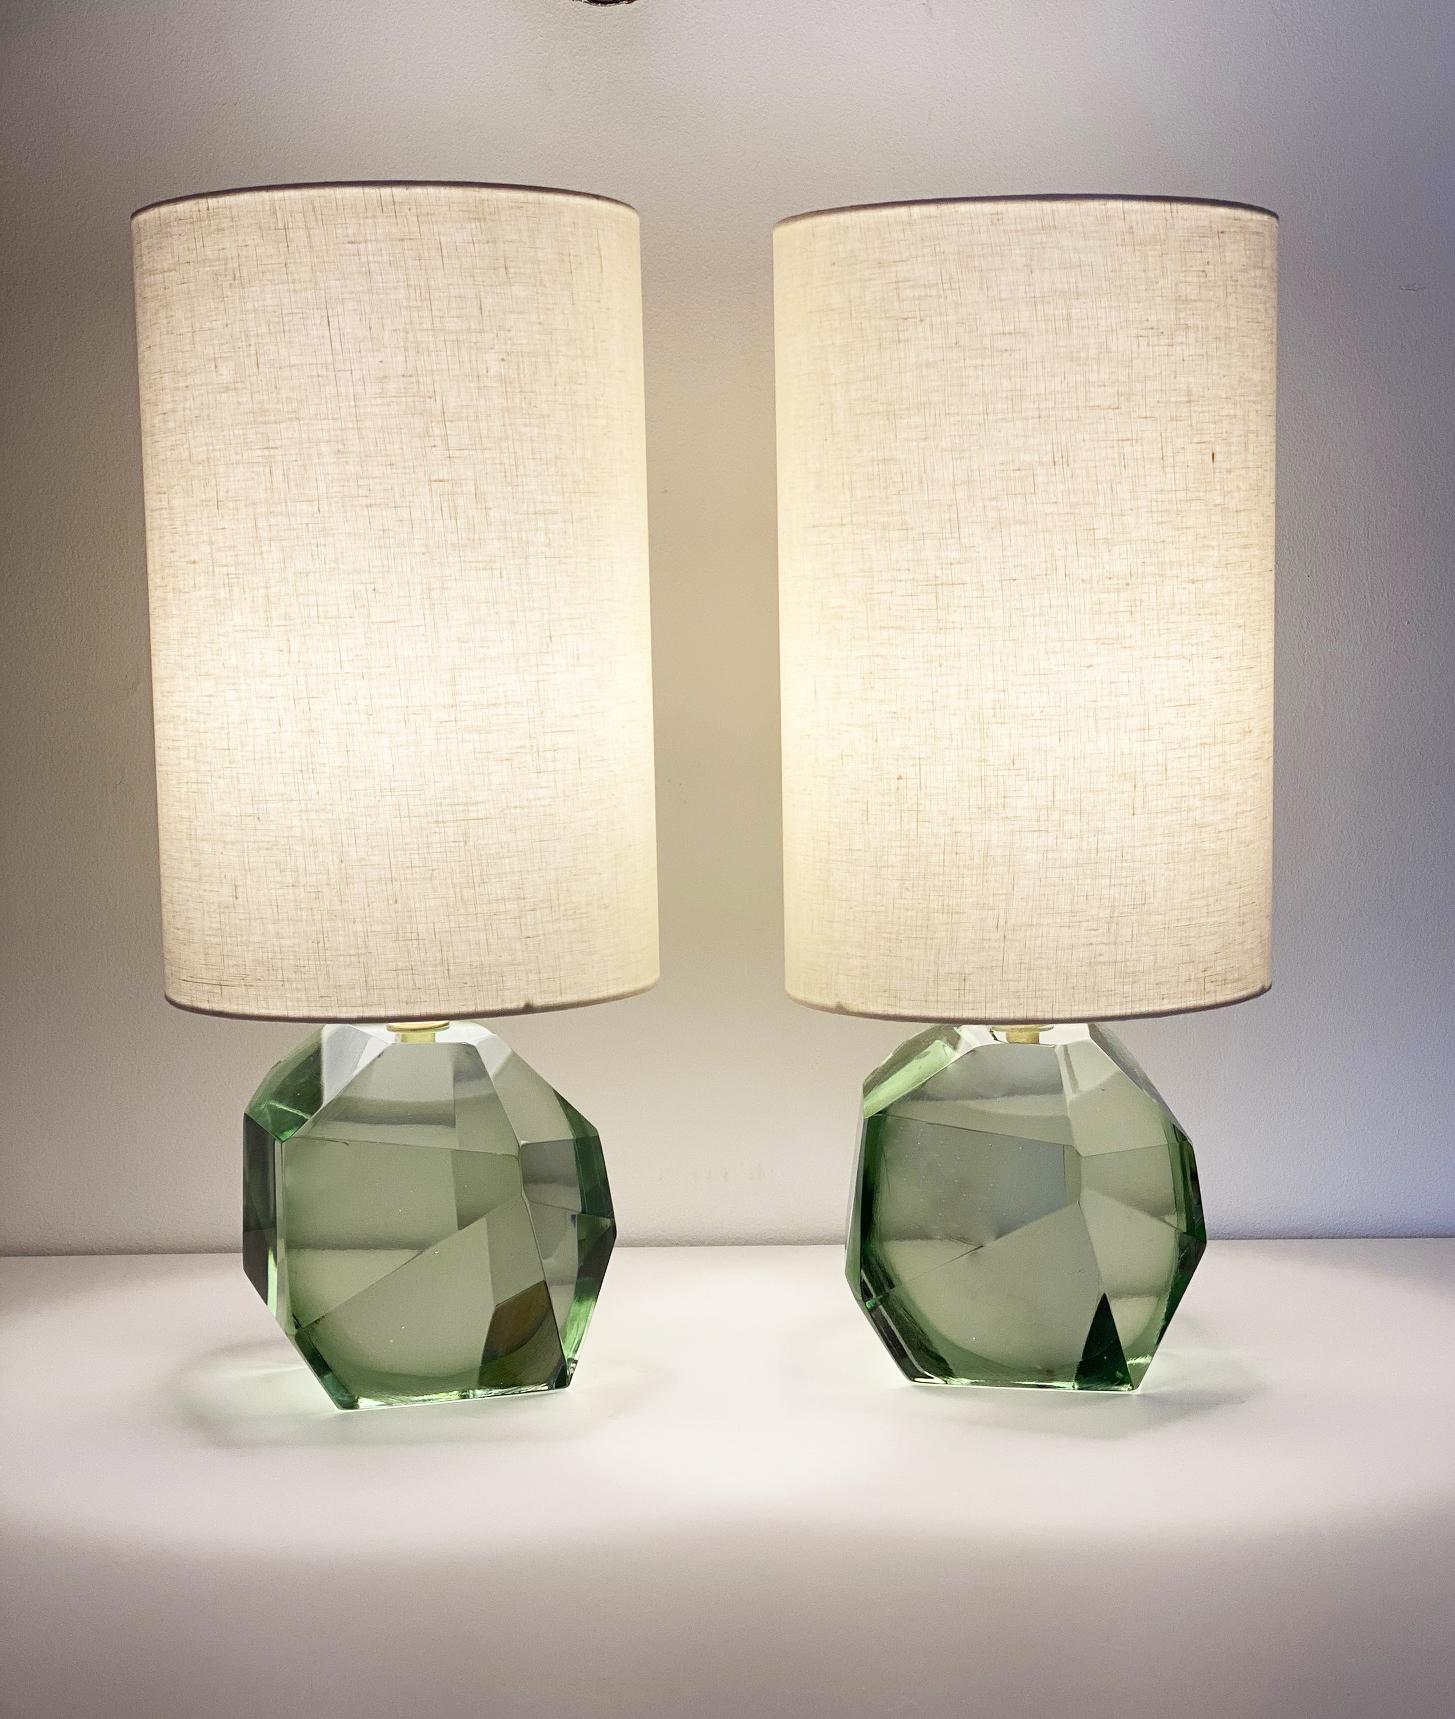 Pair of faceted diamond shaped Murano green glass table lamps, in stock
Studio-made with translucent Murano glass in aqua green hue.
Located in our store in Miami ready for shipping now.
3 pairs available
Priced per pair
Shades are